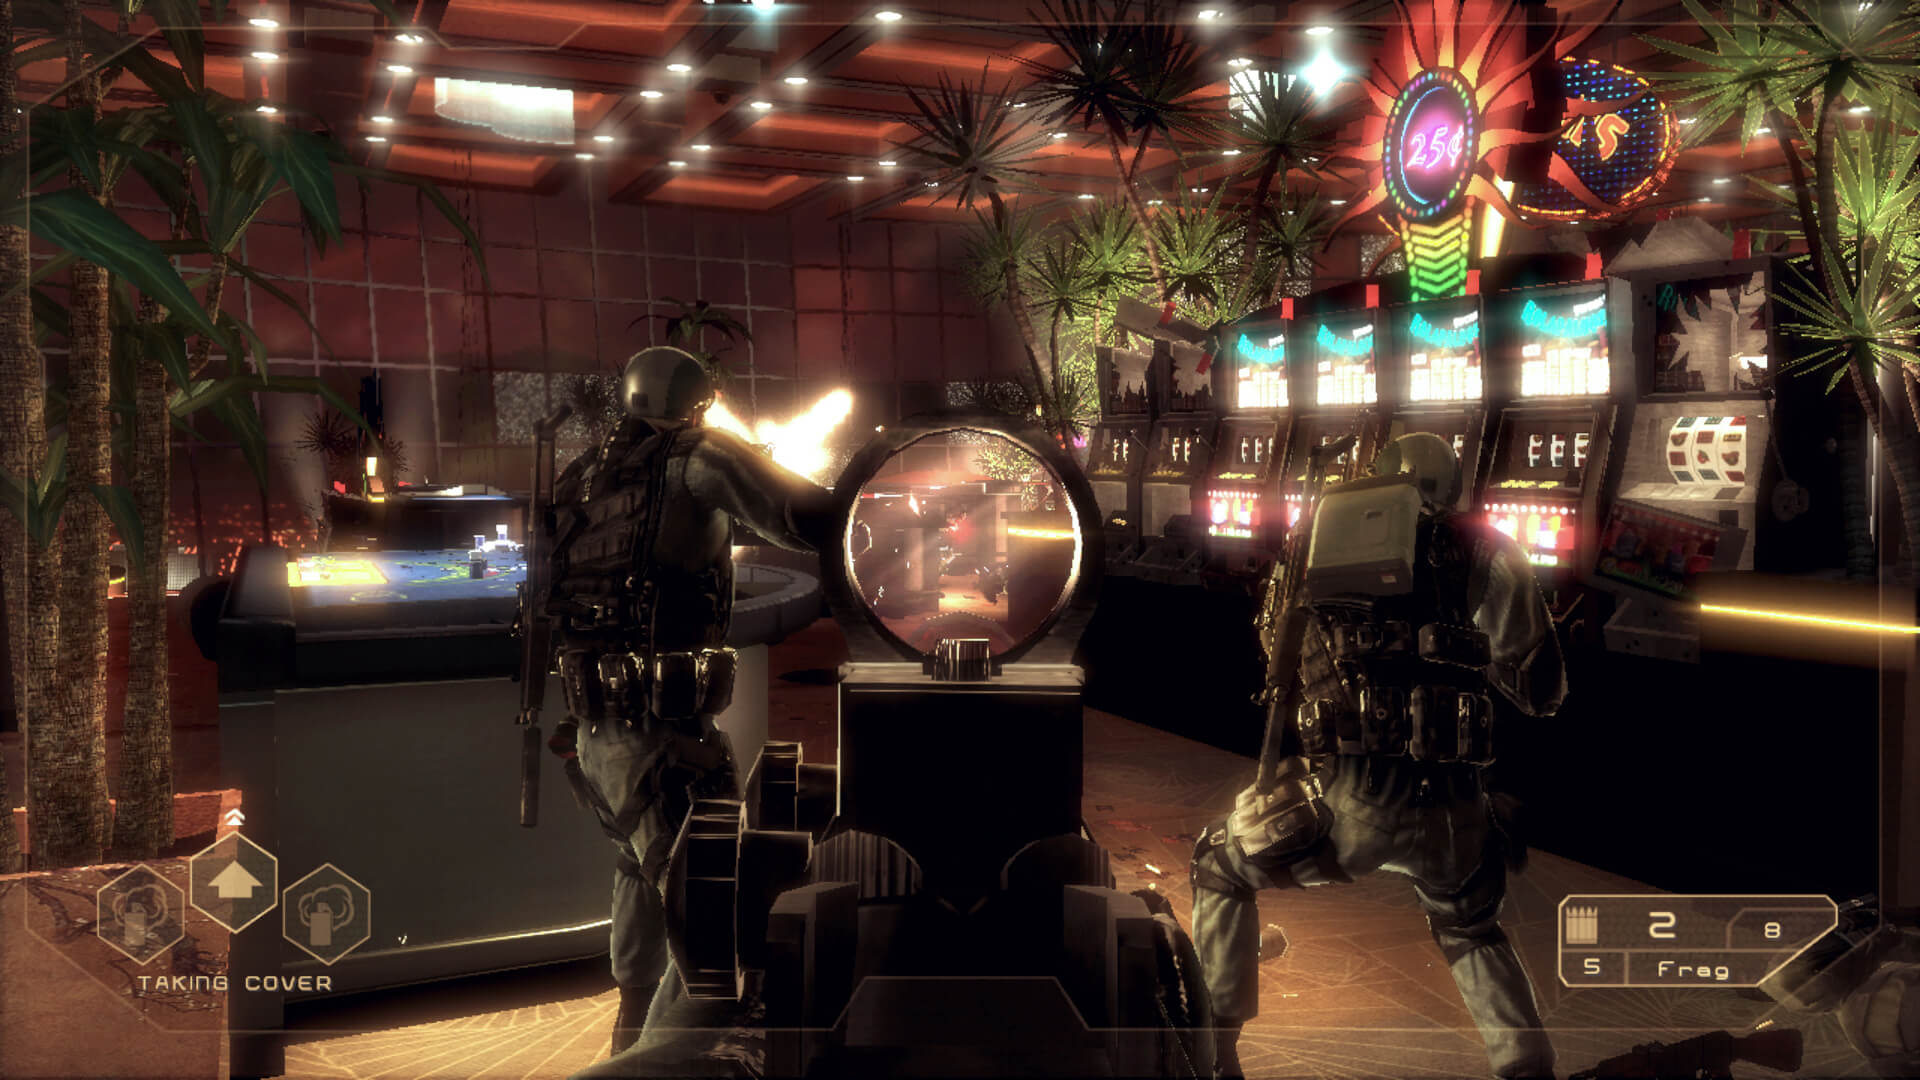 The player aiming down the sights of a rifle in a casino in the Xbox Games with Gold September 2013 game Tom Clancy's Rainbow Six Vegas